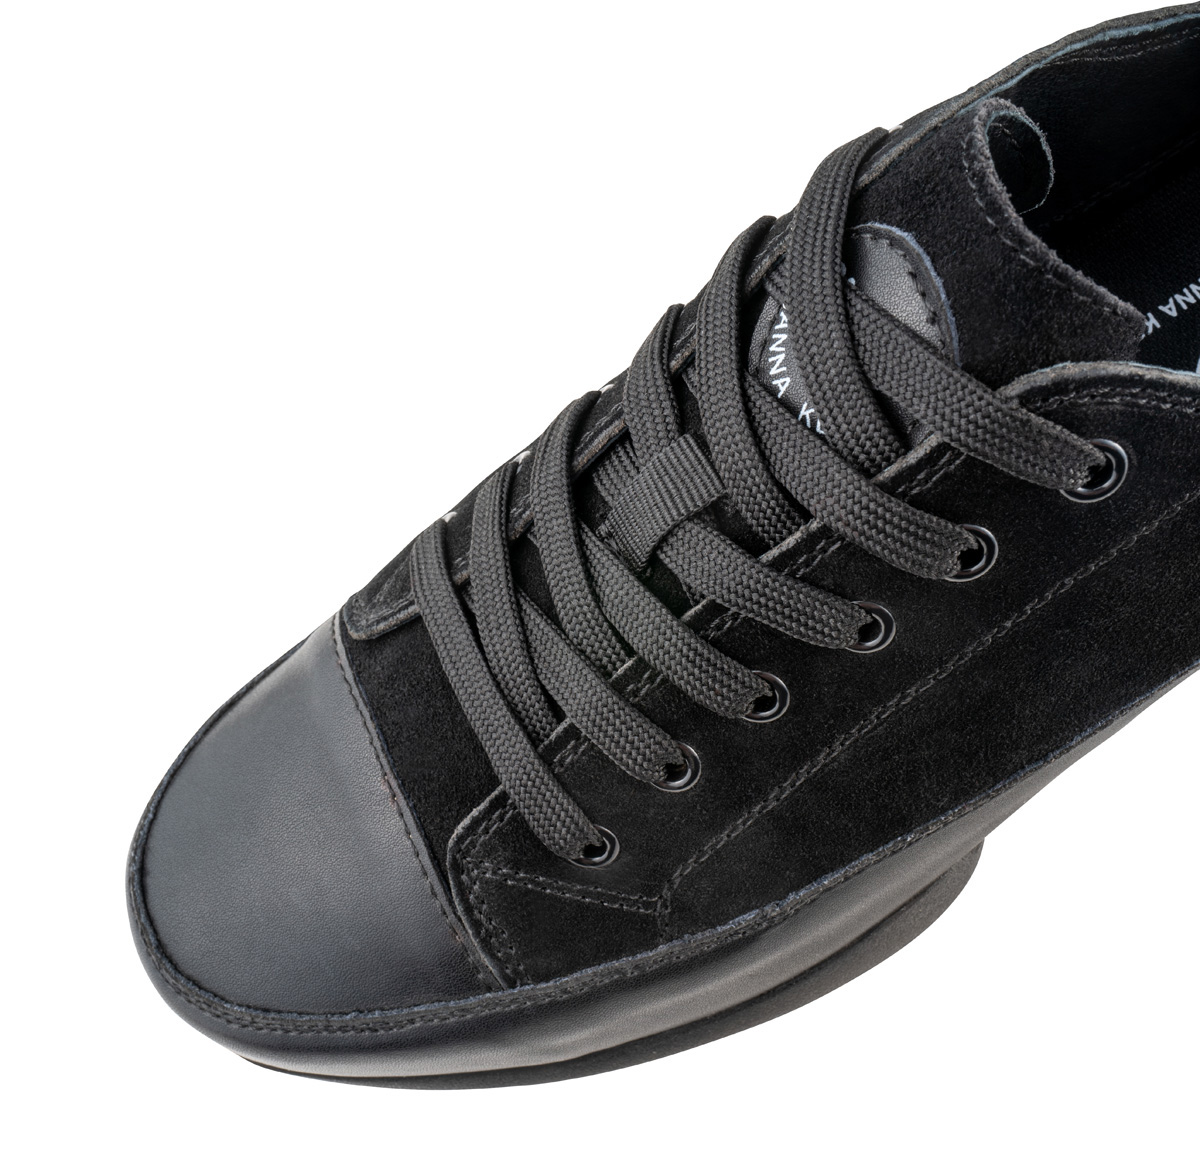 Detailed view of the black women's dance shoe by Suny in leather and suede